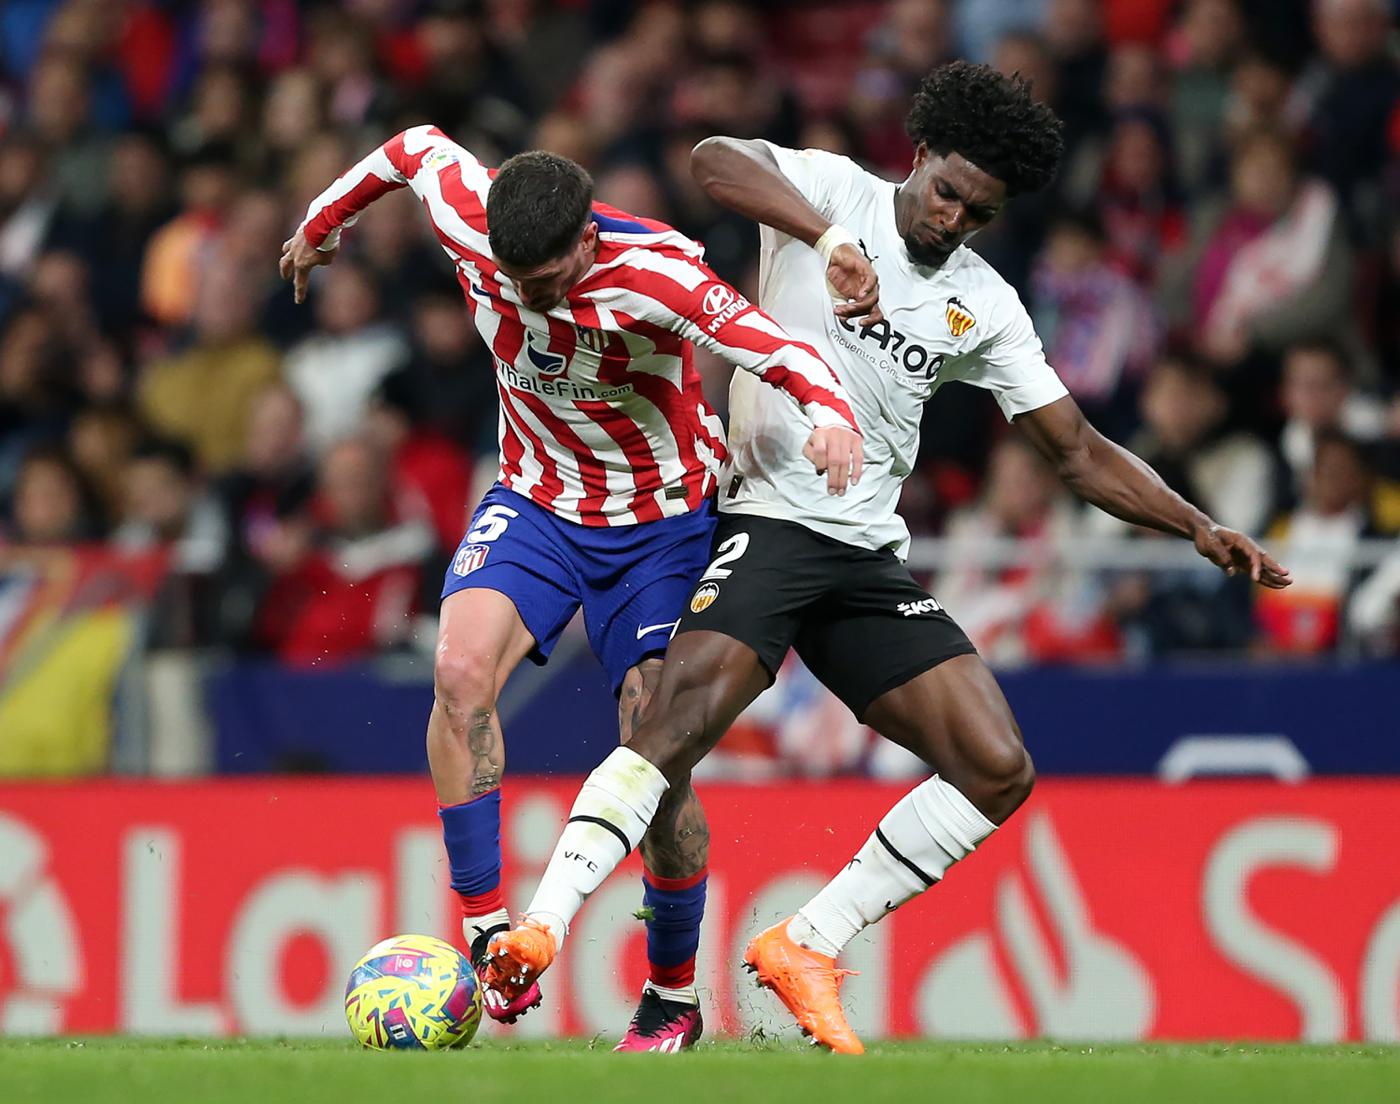 Atletico - Valencia - 3:0. Spain Championship, 26th round. Match review, statistics.